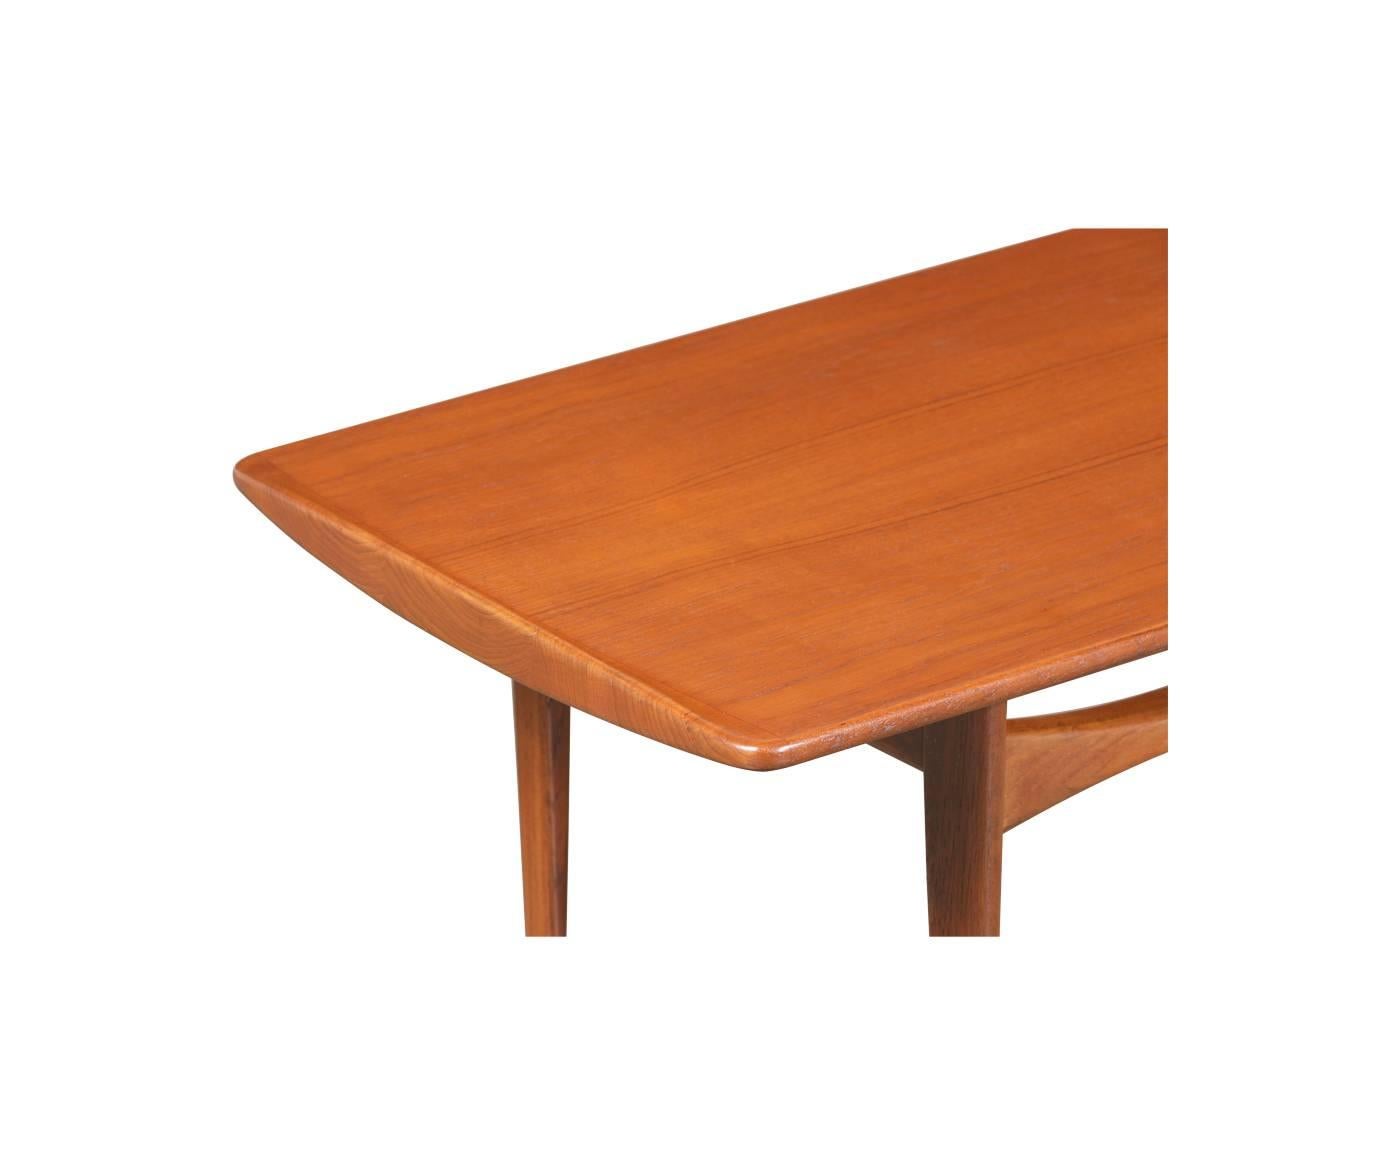 Designer: Tove & Edvard Kindt-Larsen.
Manufacturer: France & Daverkosen.
Period/Style: Danish modern.
Country: Denmark.
Date: 1950s.

Dimensions: 18″ H x 47.25″ W x 20.25″ D.
Materials: Teak.
Condition: Excellent, newly refinished.
Number